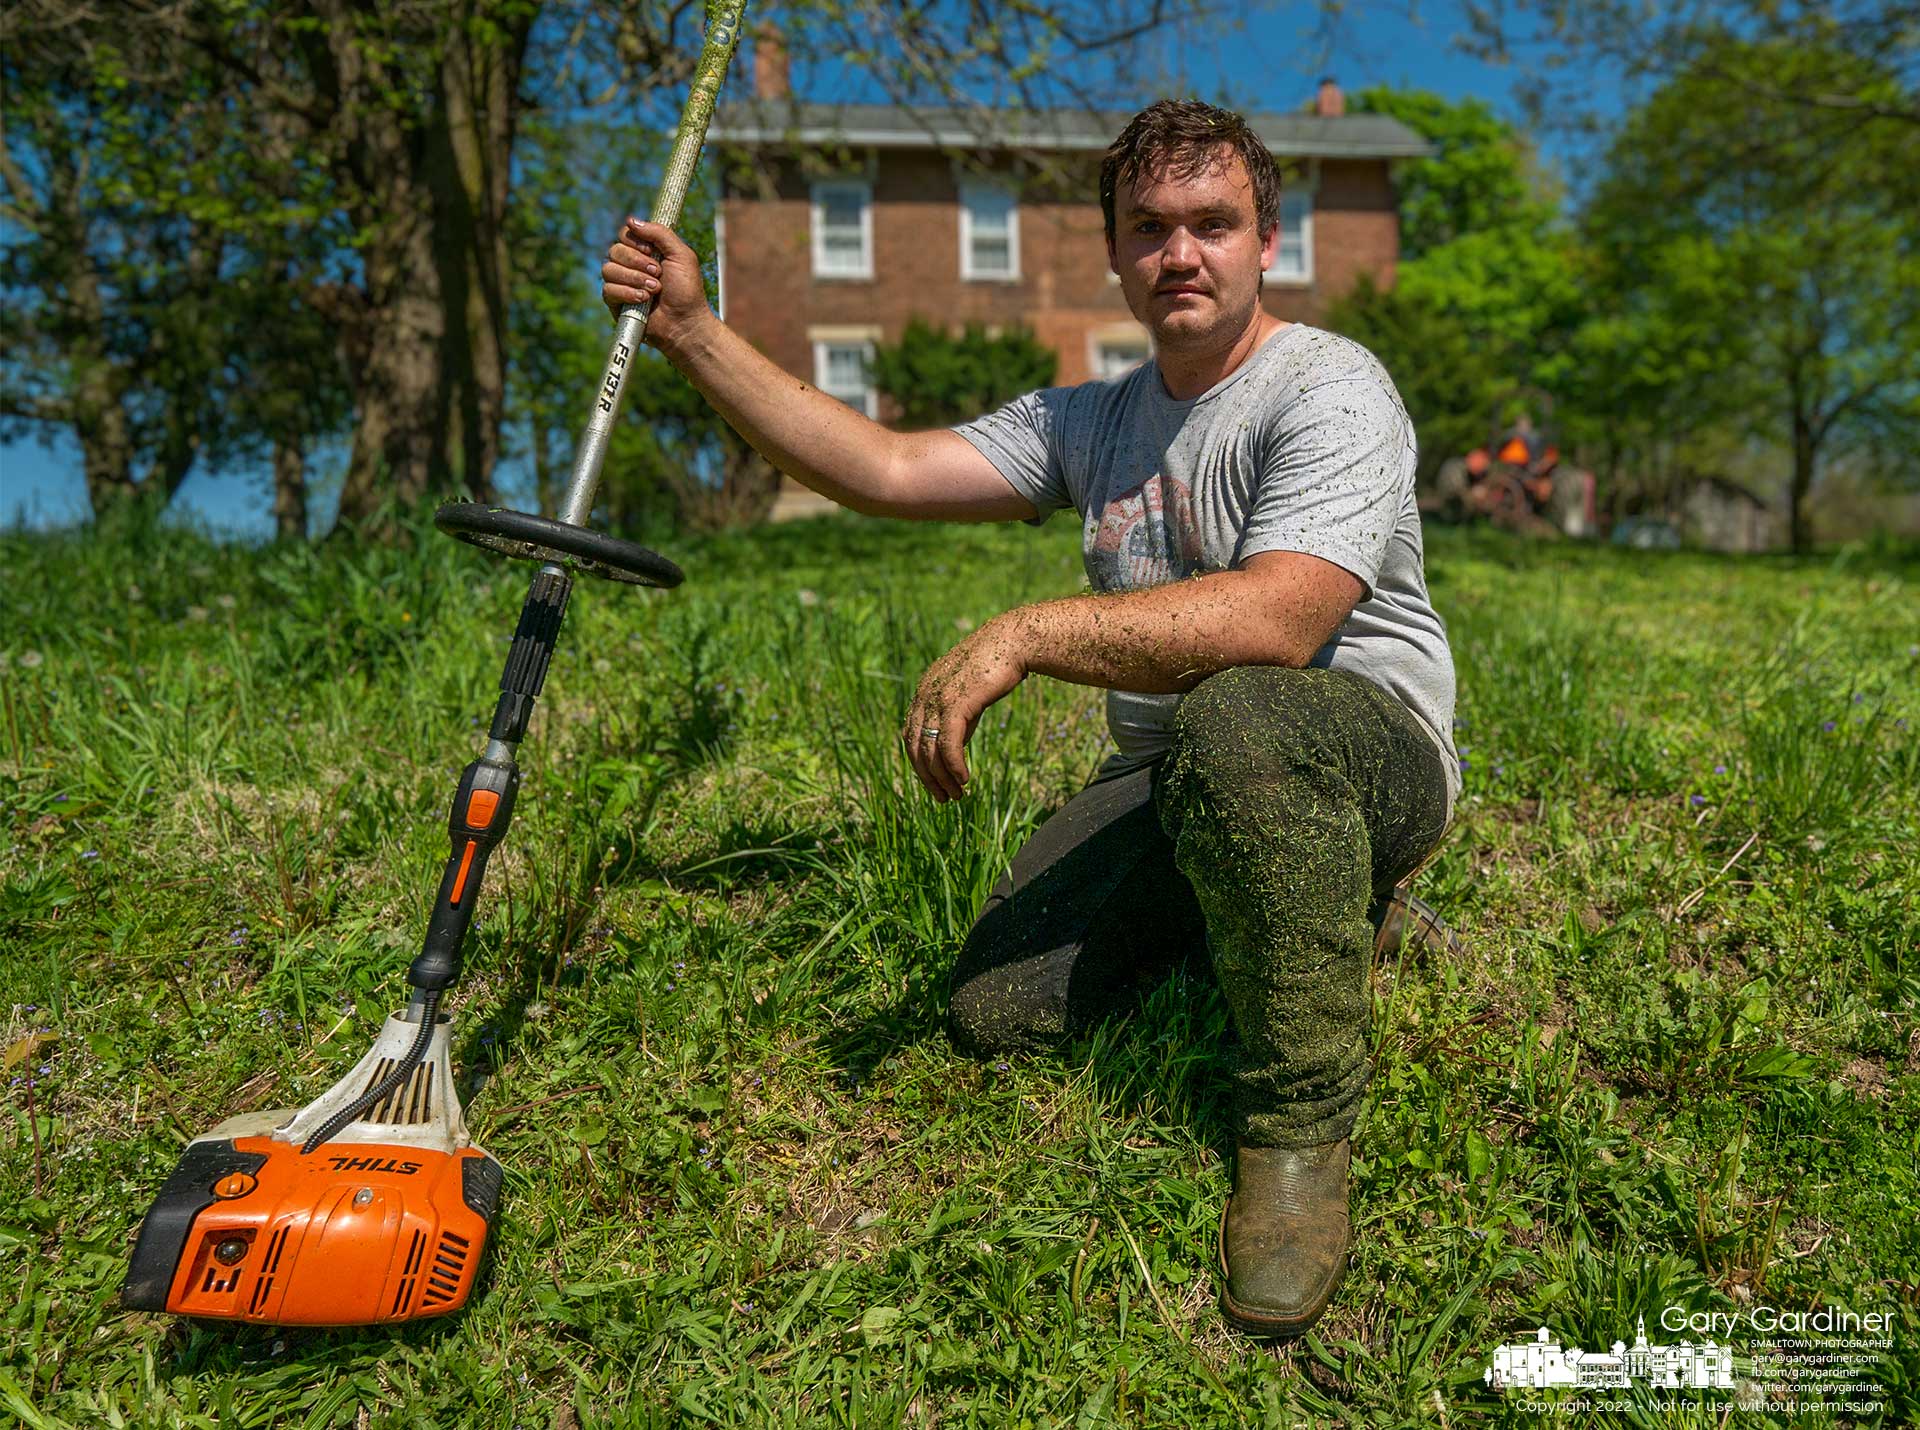 Brandon Rogers, a recent medical school graduate, kneels with the weed trimmer he's using to clear grass around sections of the Sharp Farm on Africa Road where the open fields are used to grow hay. My Final Photo for May 9, 2022.